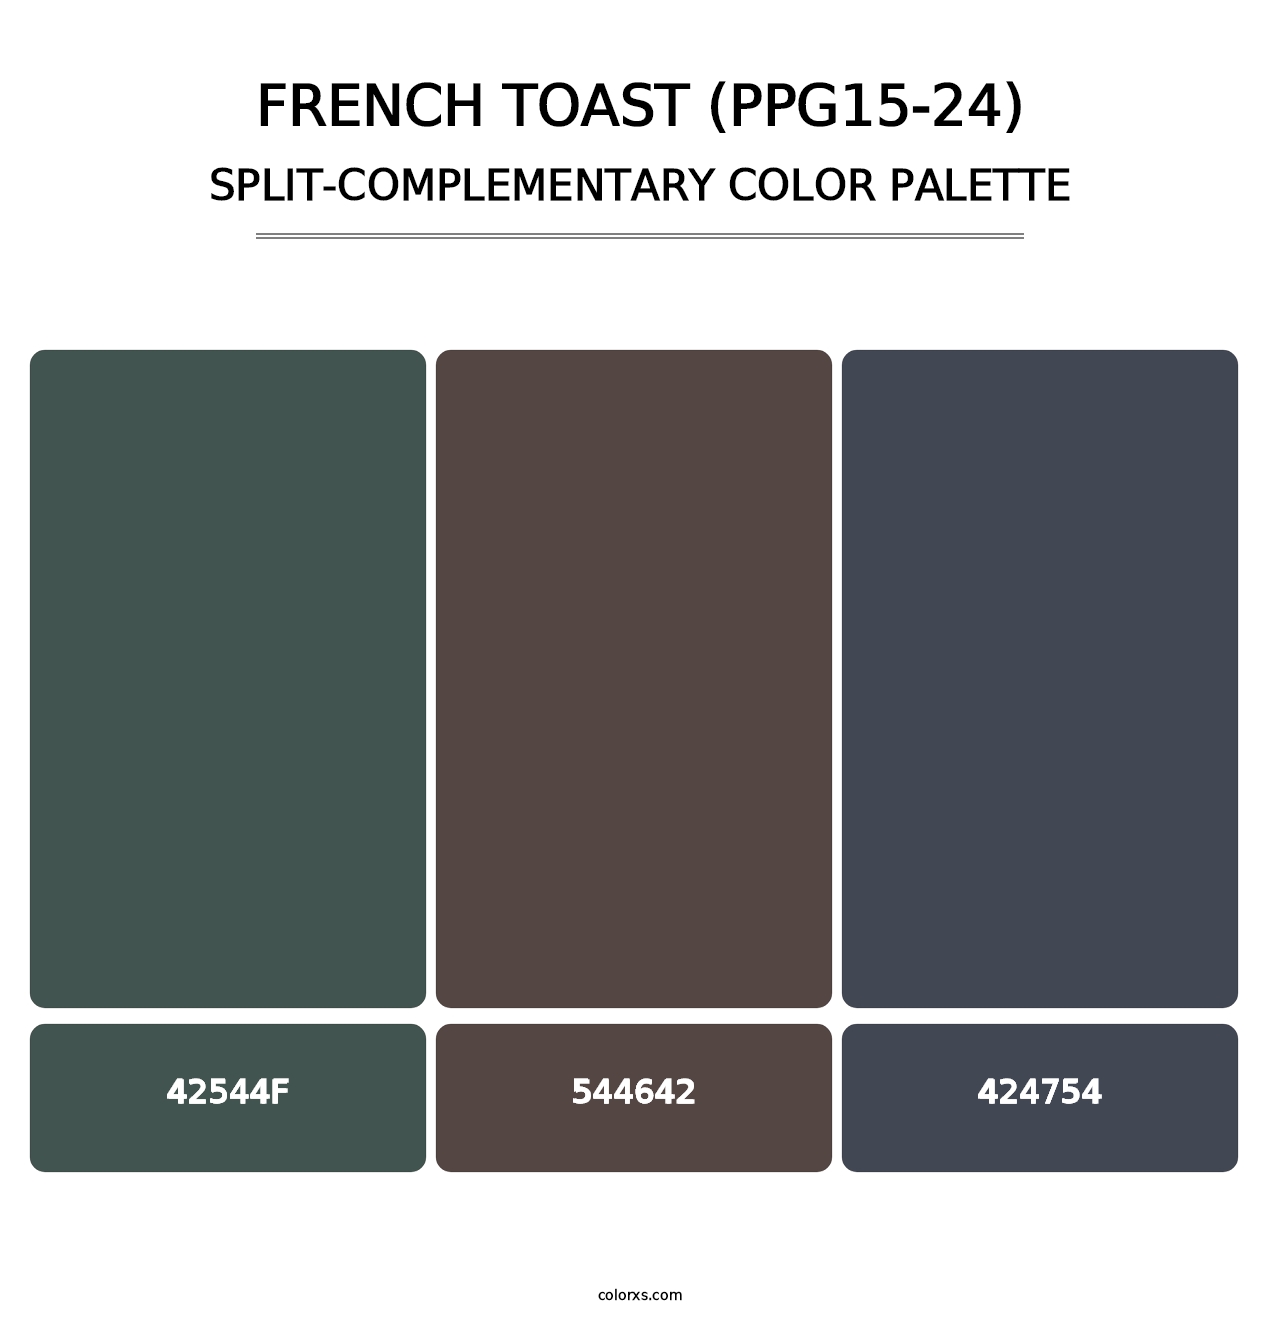 French Toast (PPG15-24) - Split-Complementary Color Palette